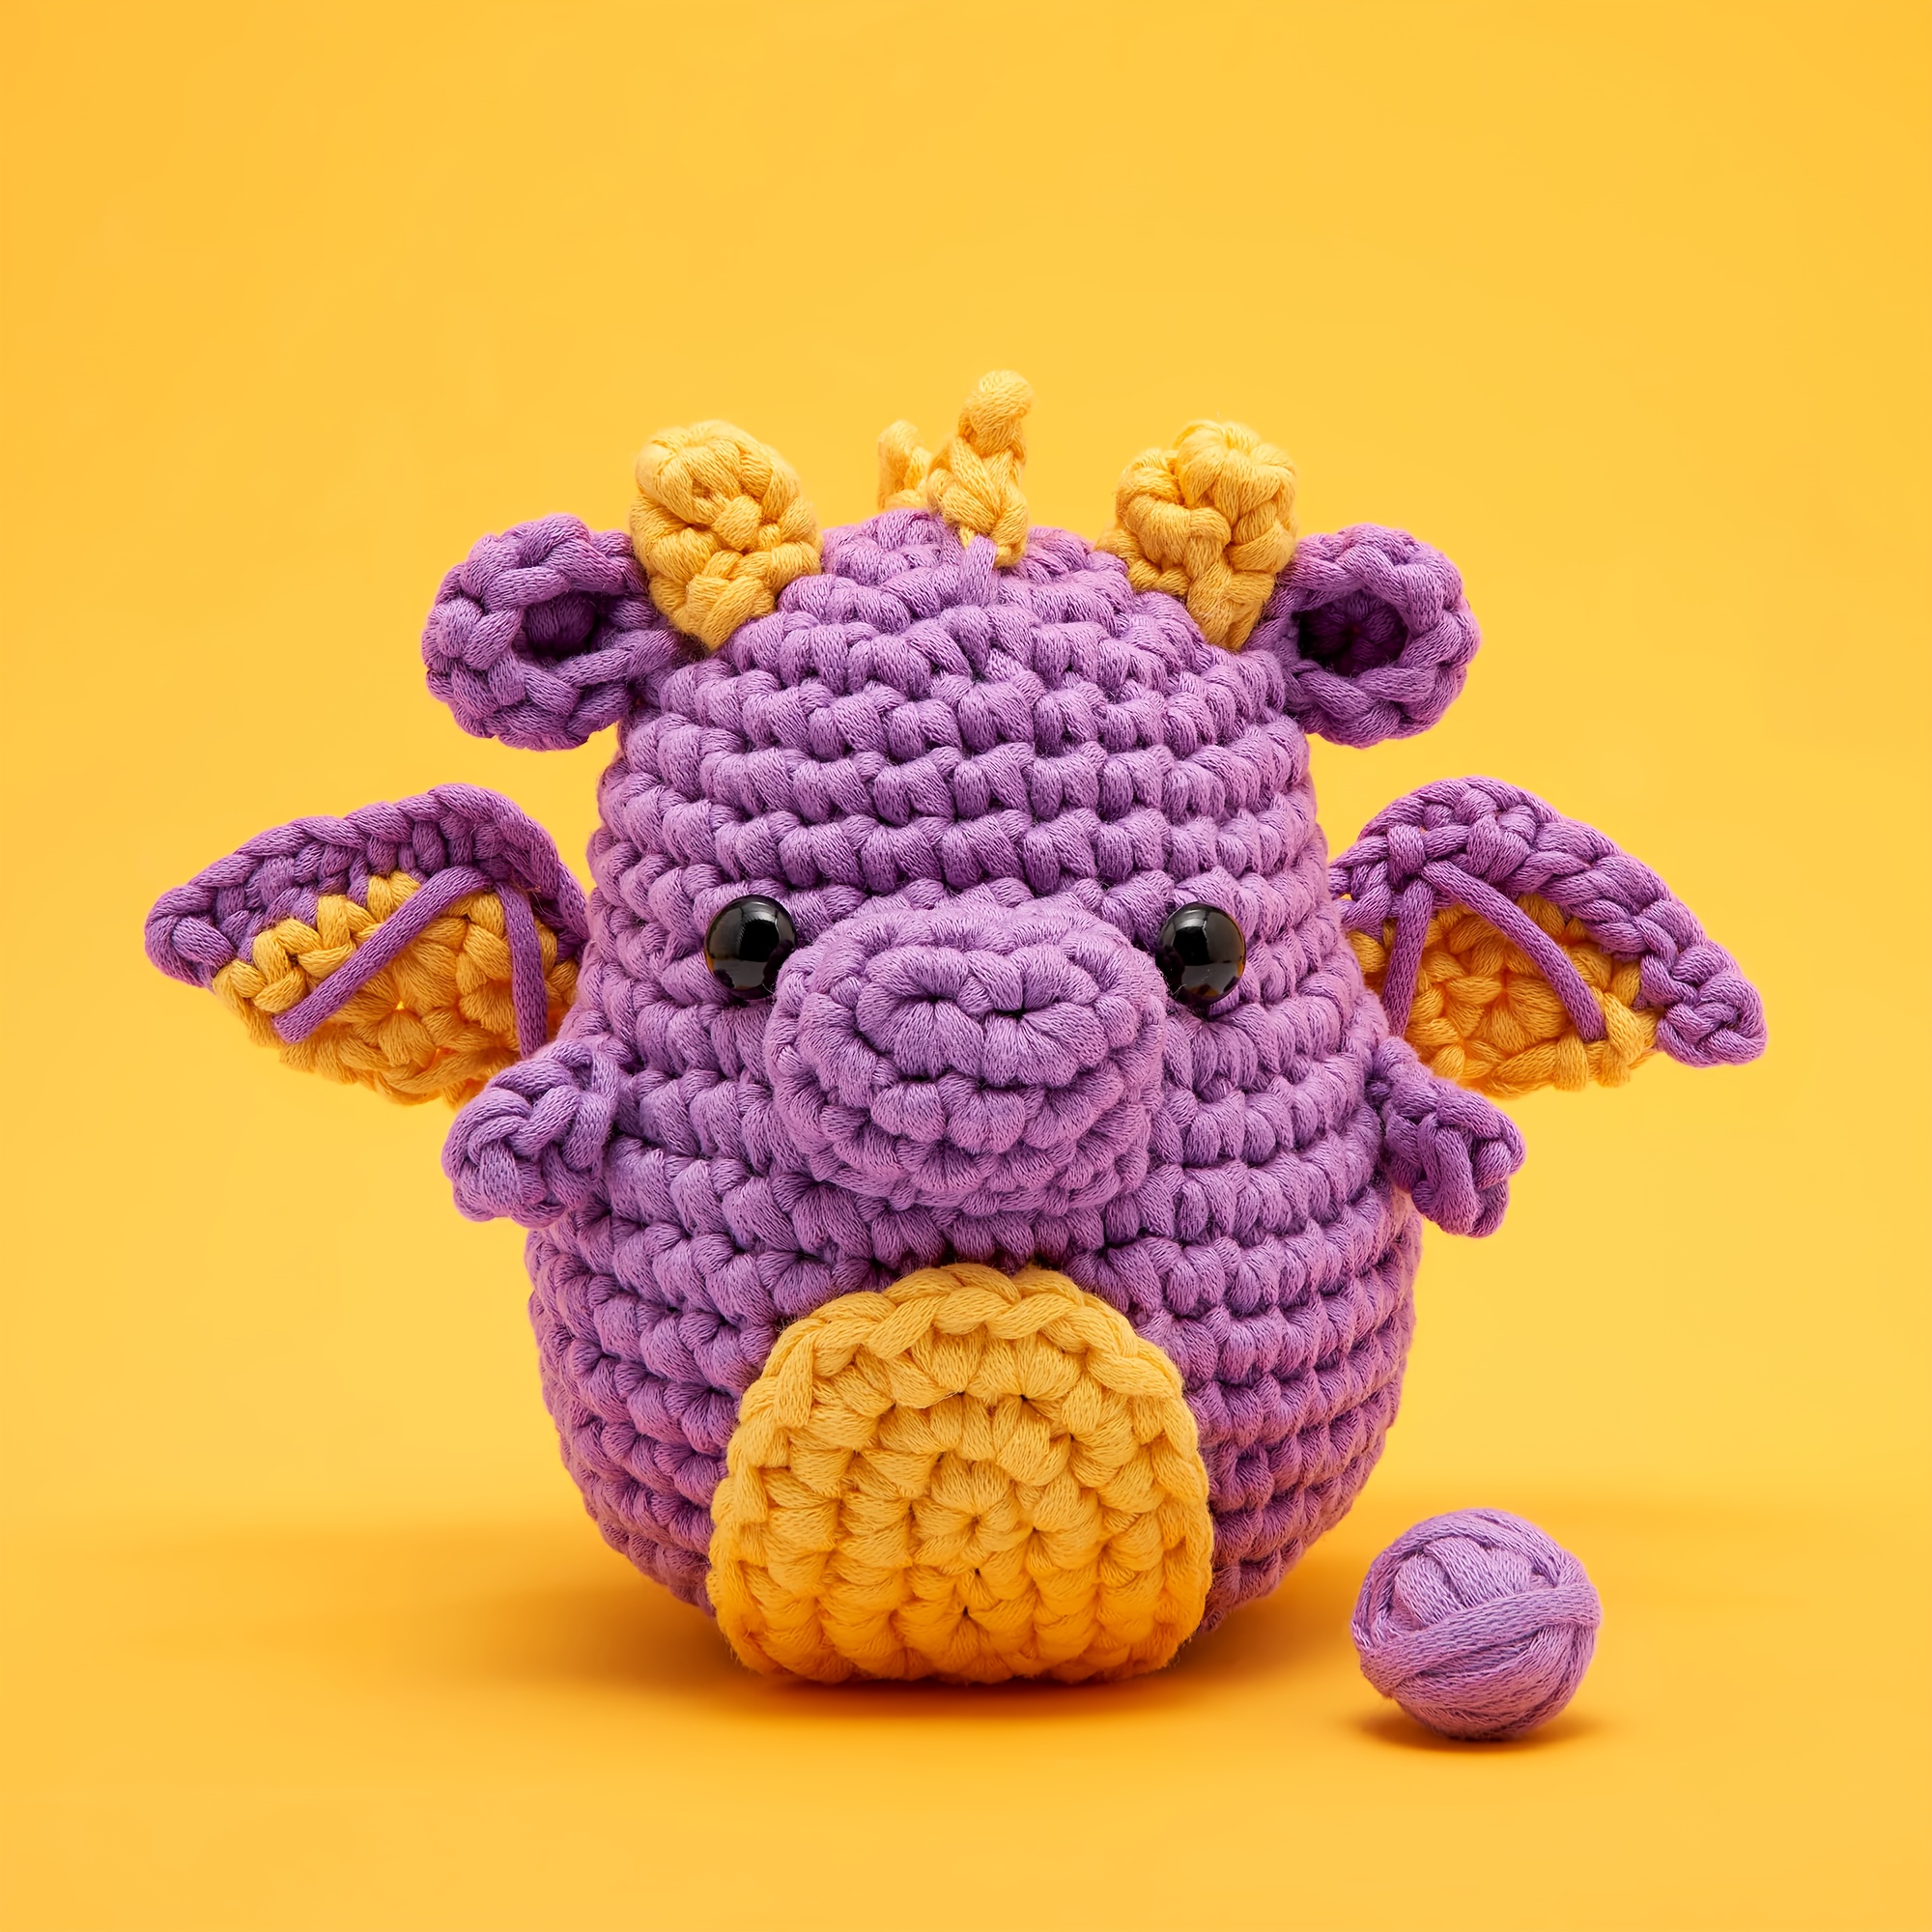 

Dragon Crochet Kit For Beginners - Easy Pea Yarn Craft Set With Step-by-step Video Tutorial, All-season Fabric Material, Deep Purple